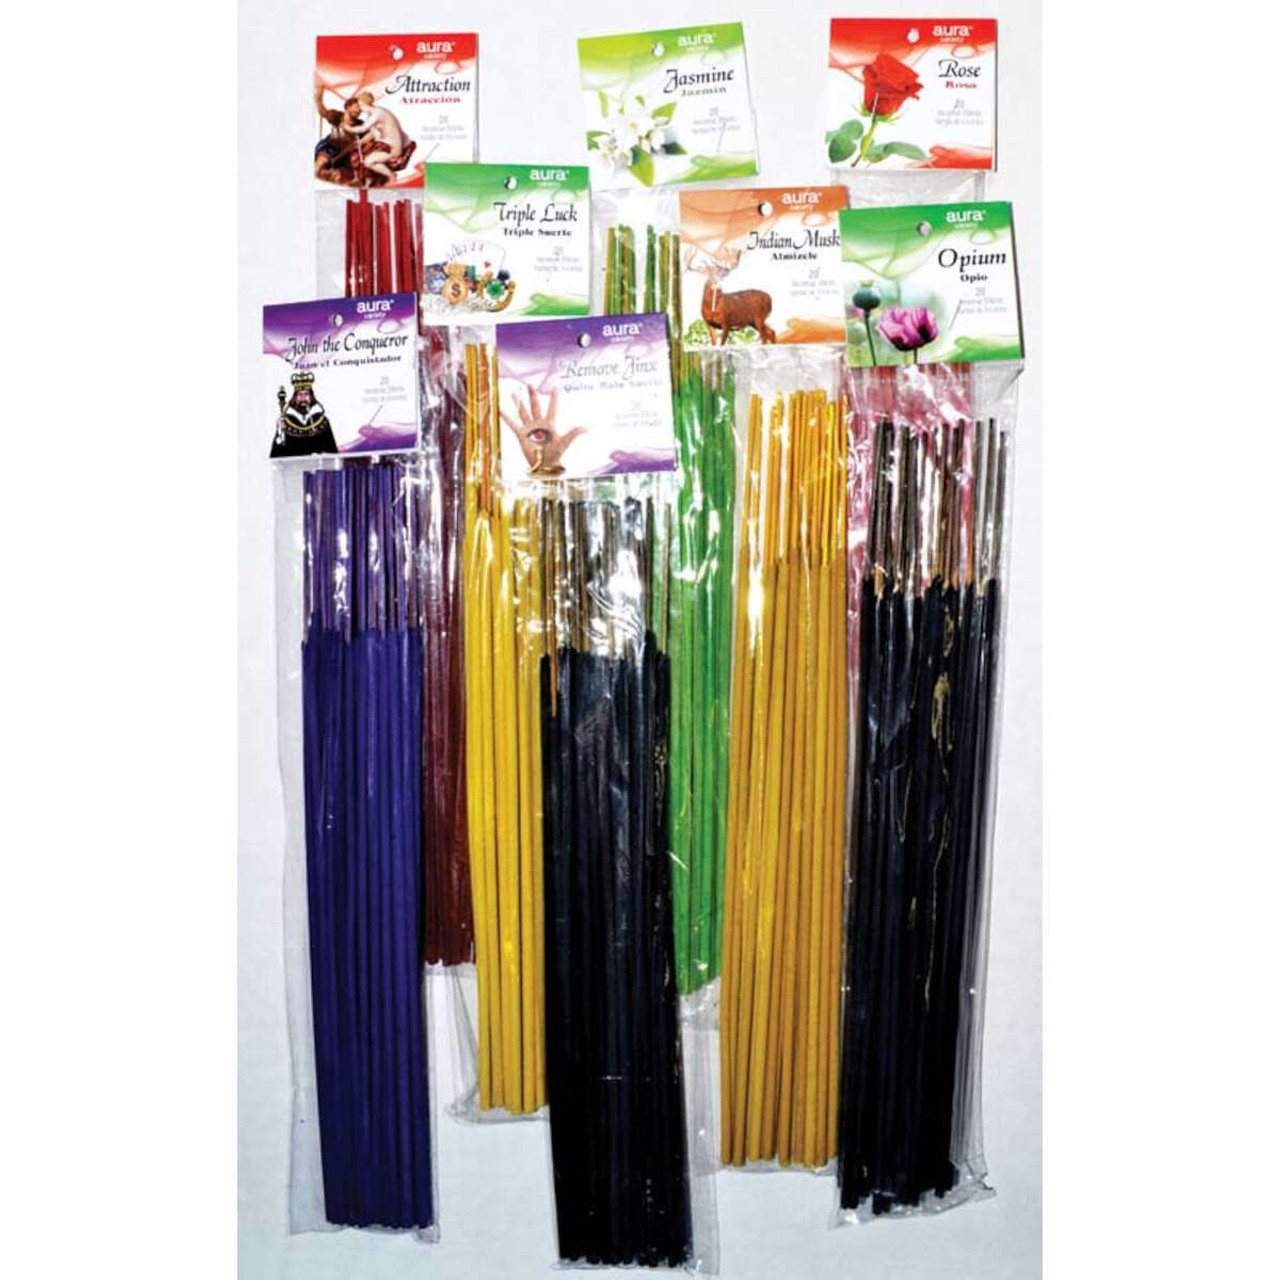 7 African Powers Aura Incense Stick 21 pack